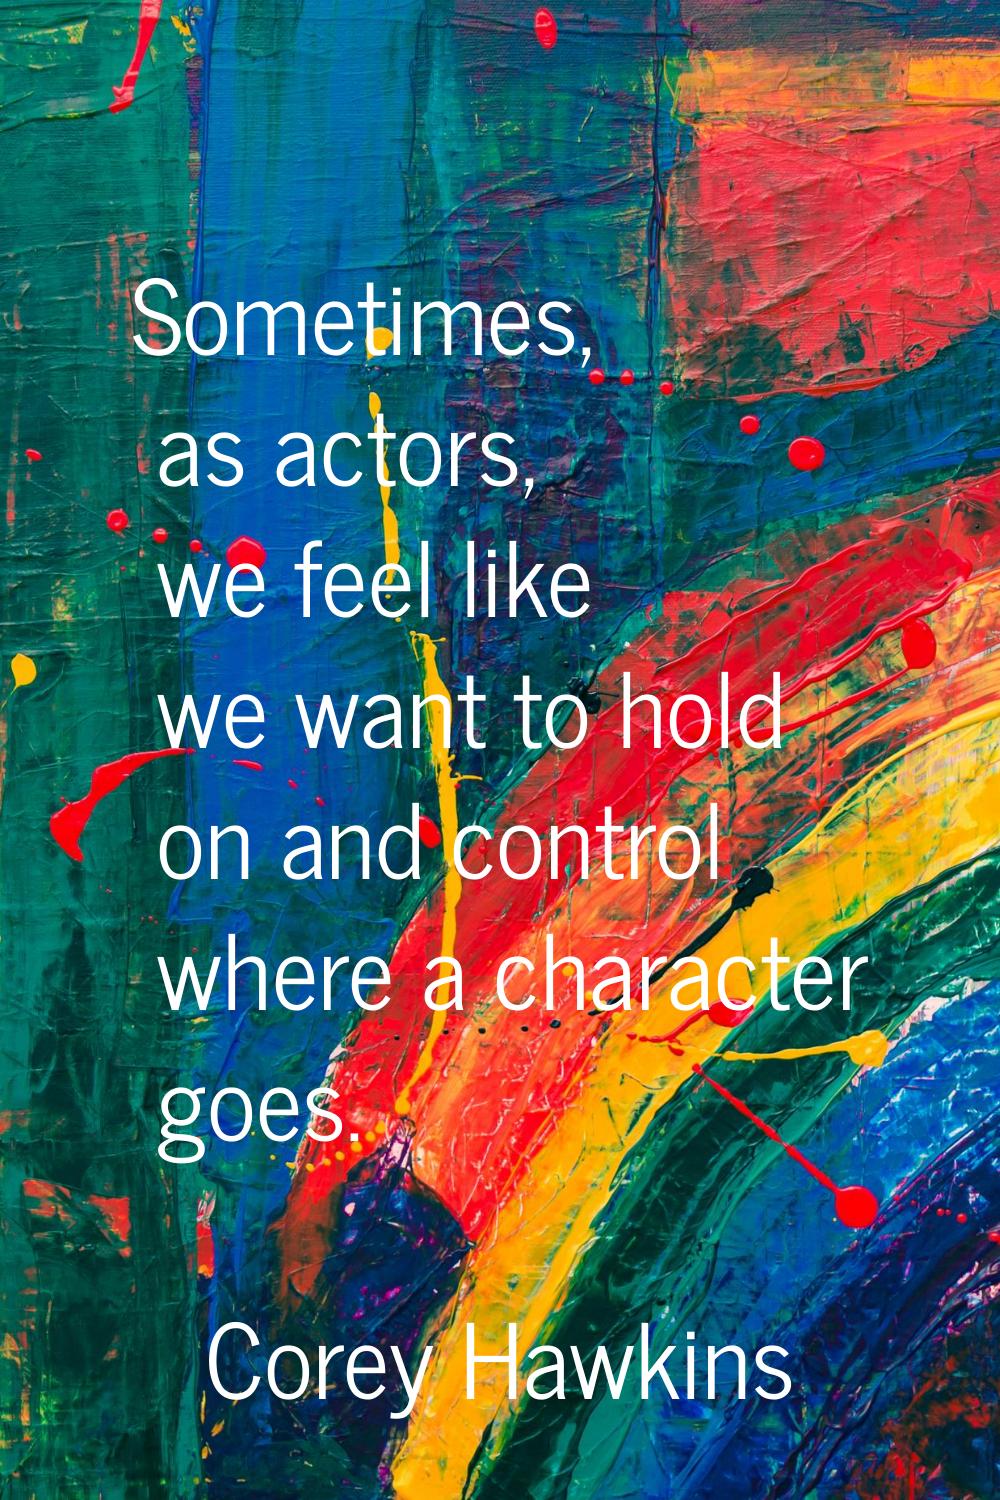 Sometimes, as actors, we feel like we want to hold on and control where a character goes.